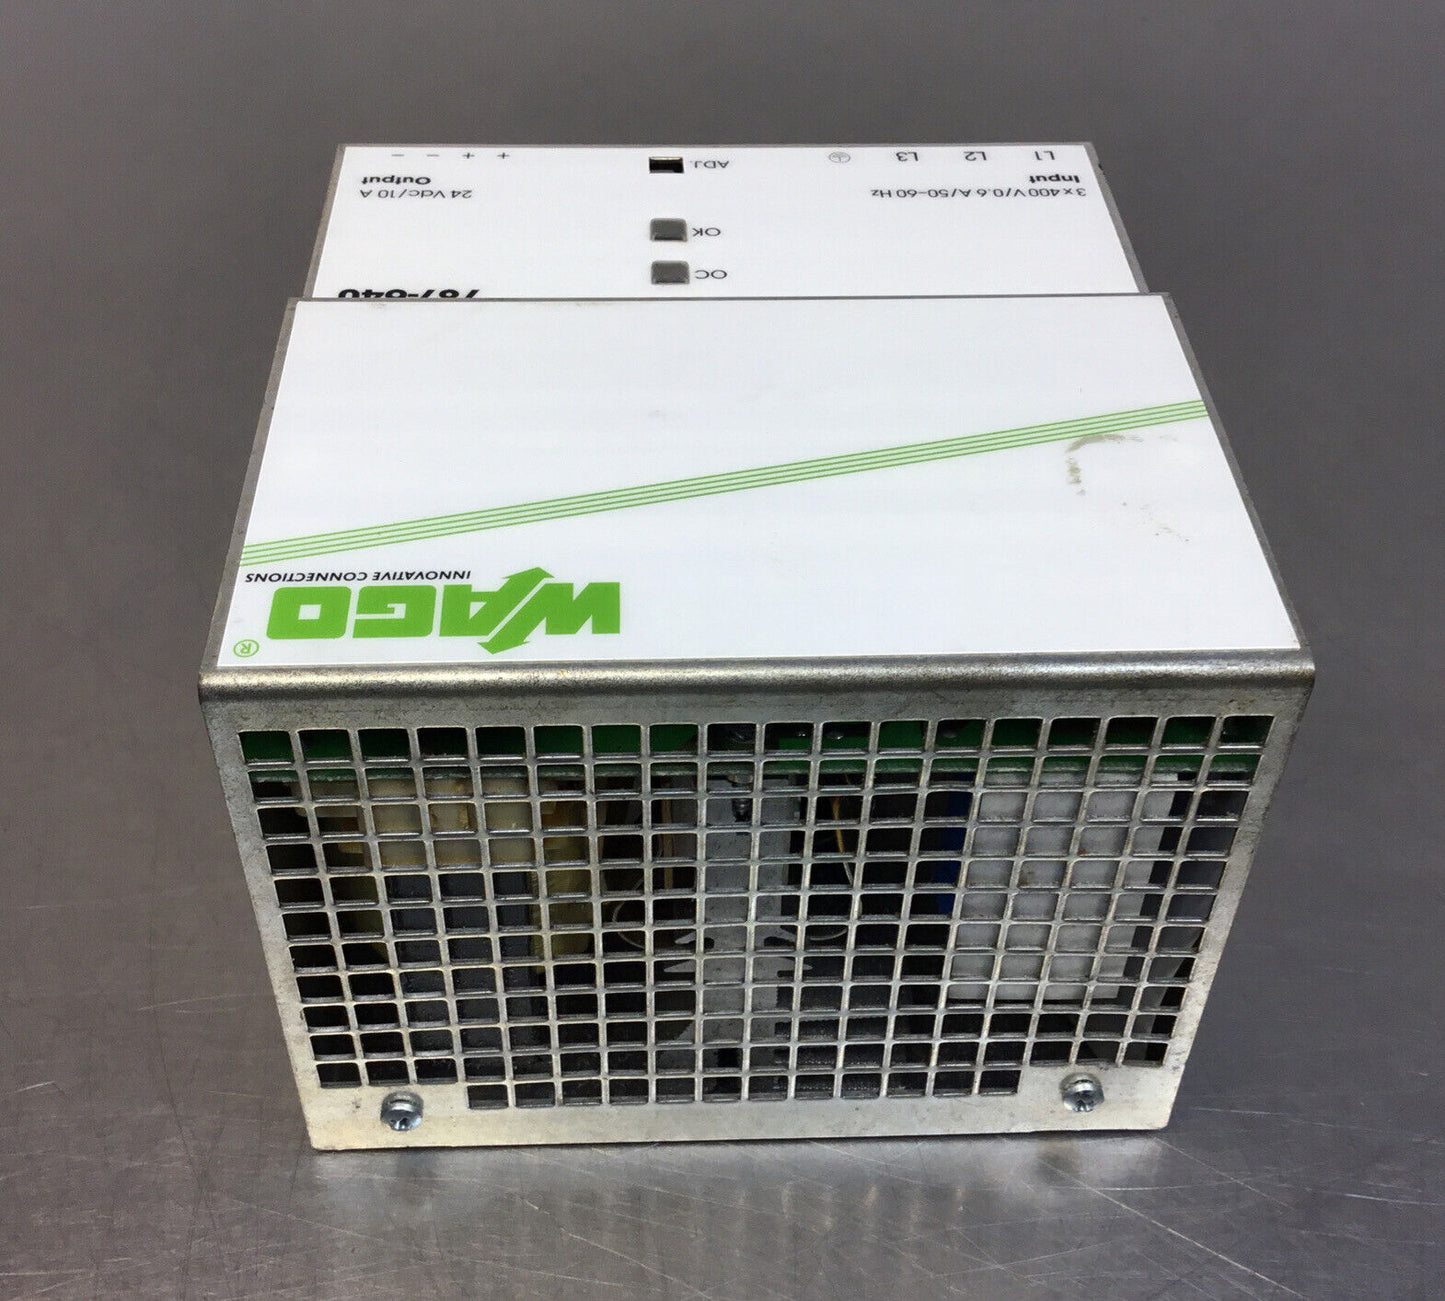 Wago 787-640 Switched - Mode Power Supply Out: 24VDC 10A/240W   4E-8